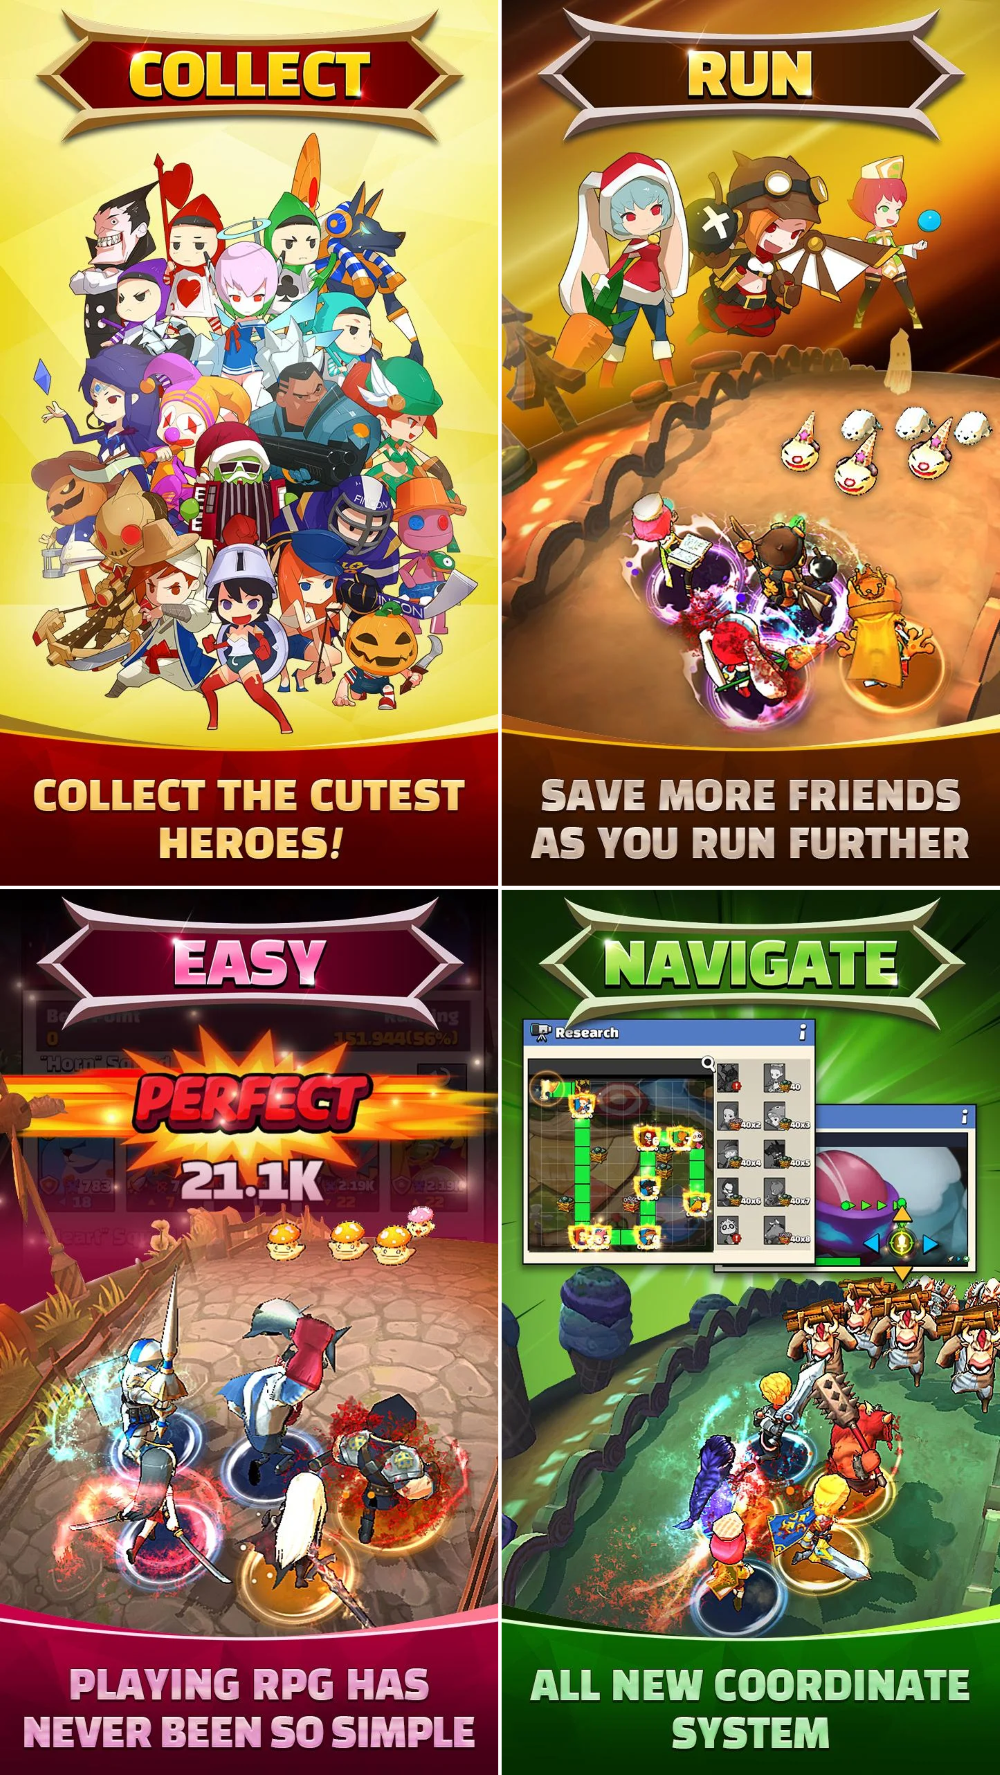 Hello Hero All Stars features image